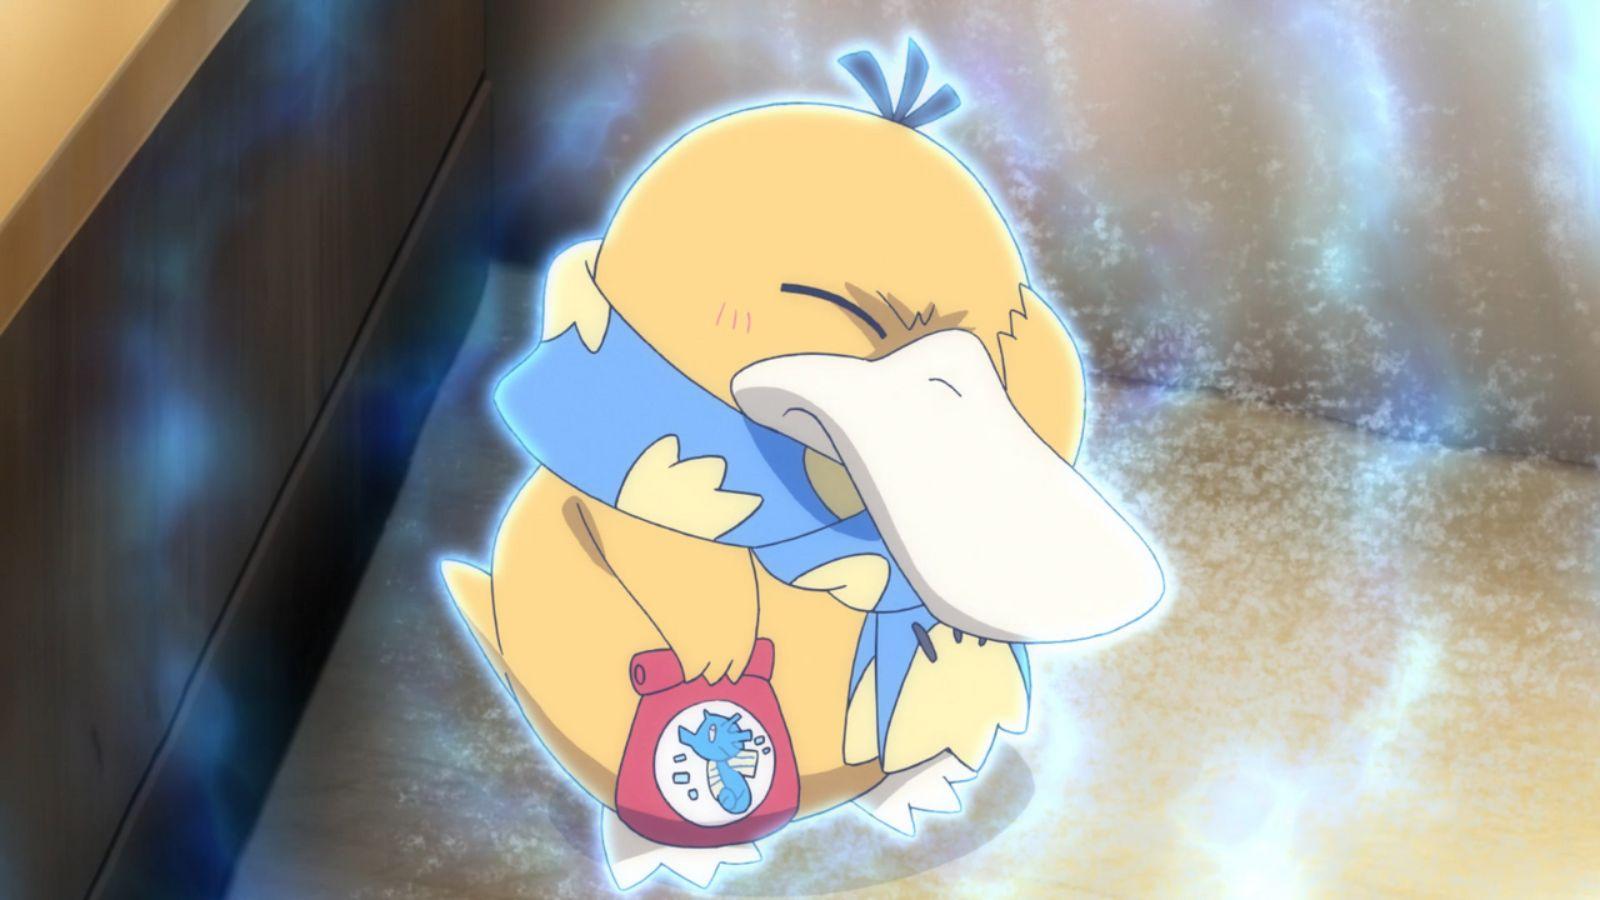 Psyduck from Pokemon anime.